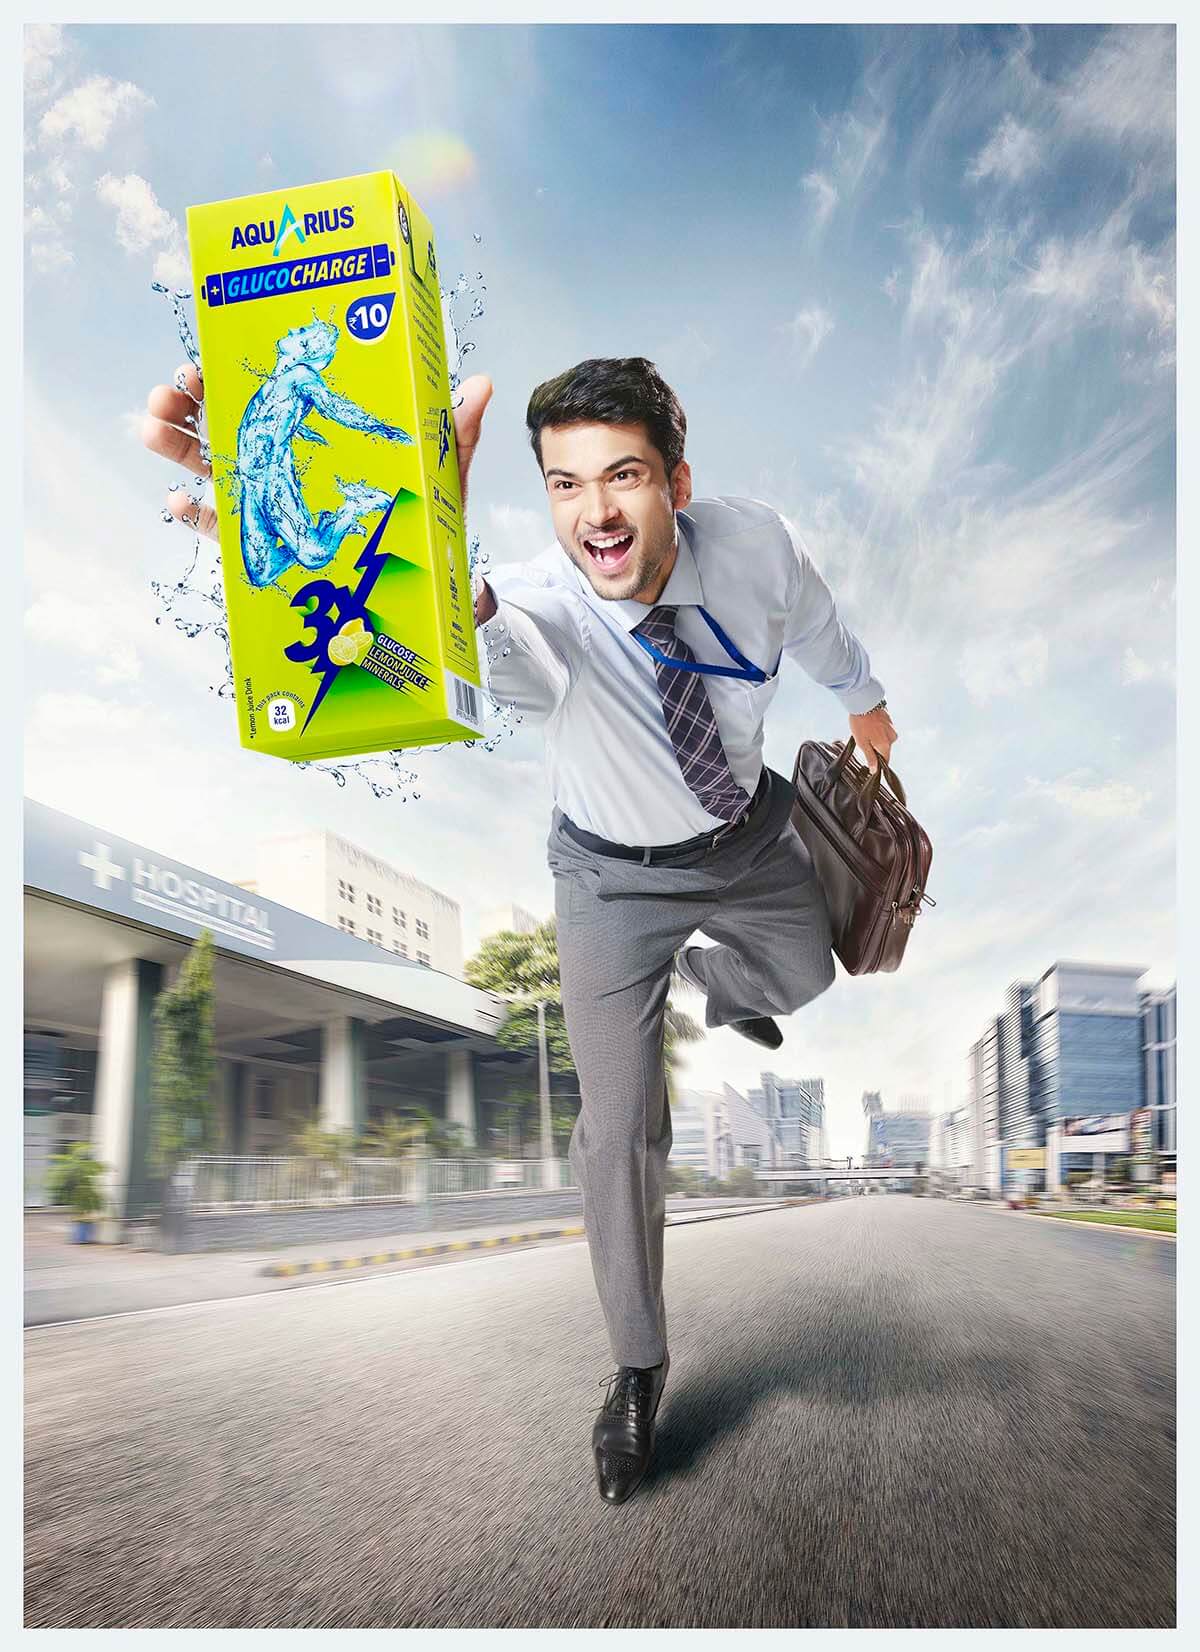 Advertising campaign shoot for Aquarius Energy Drink ...